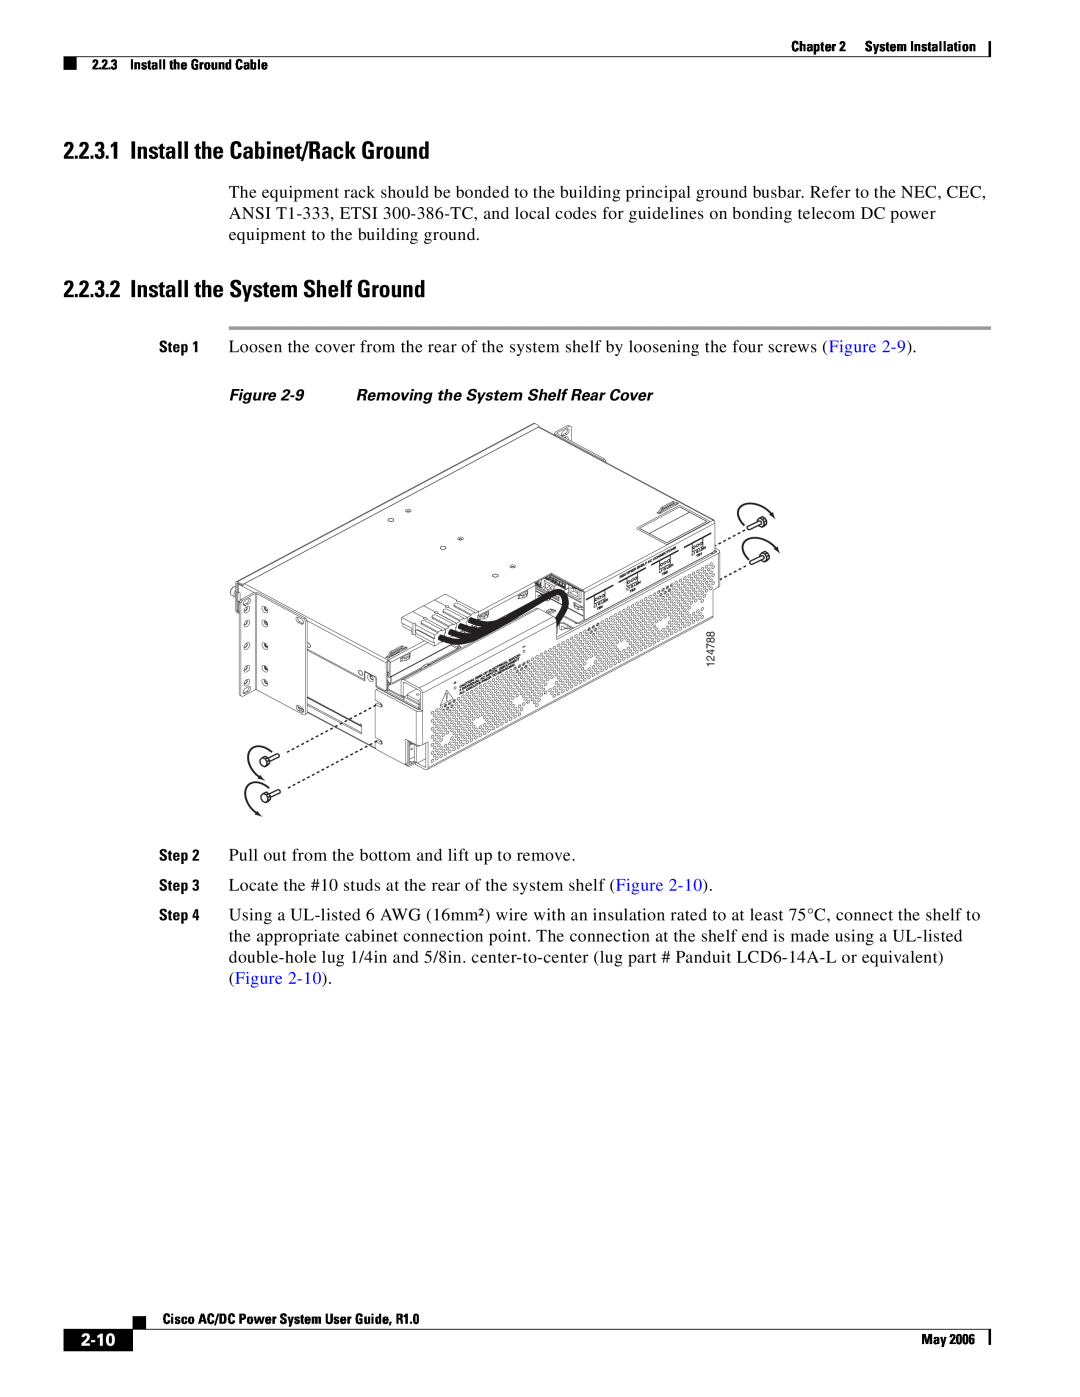 Cisco Systems 159330, 124792, 124778 manual Install the Cabinet/Rack Ground, Install the System Shelf Ground, 2-10 